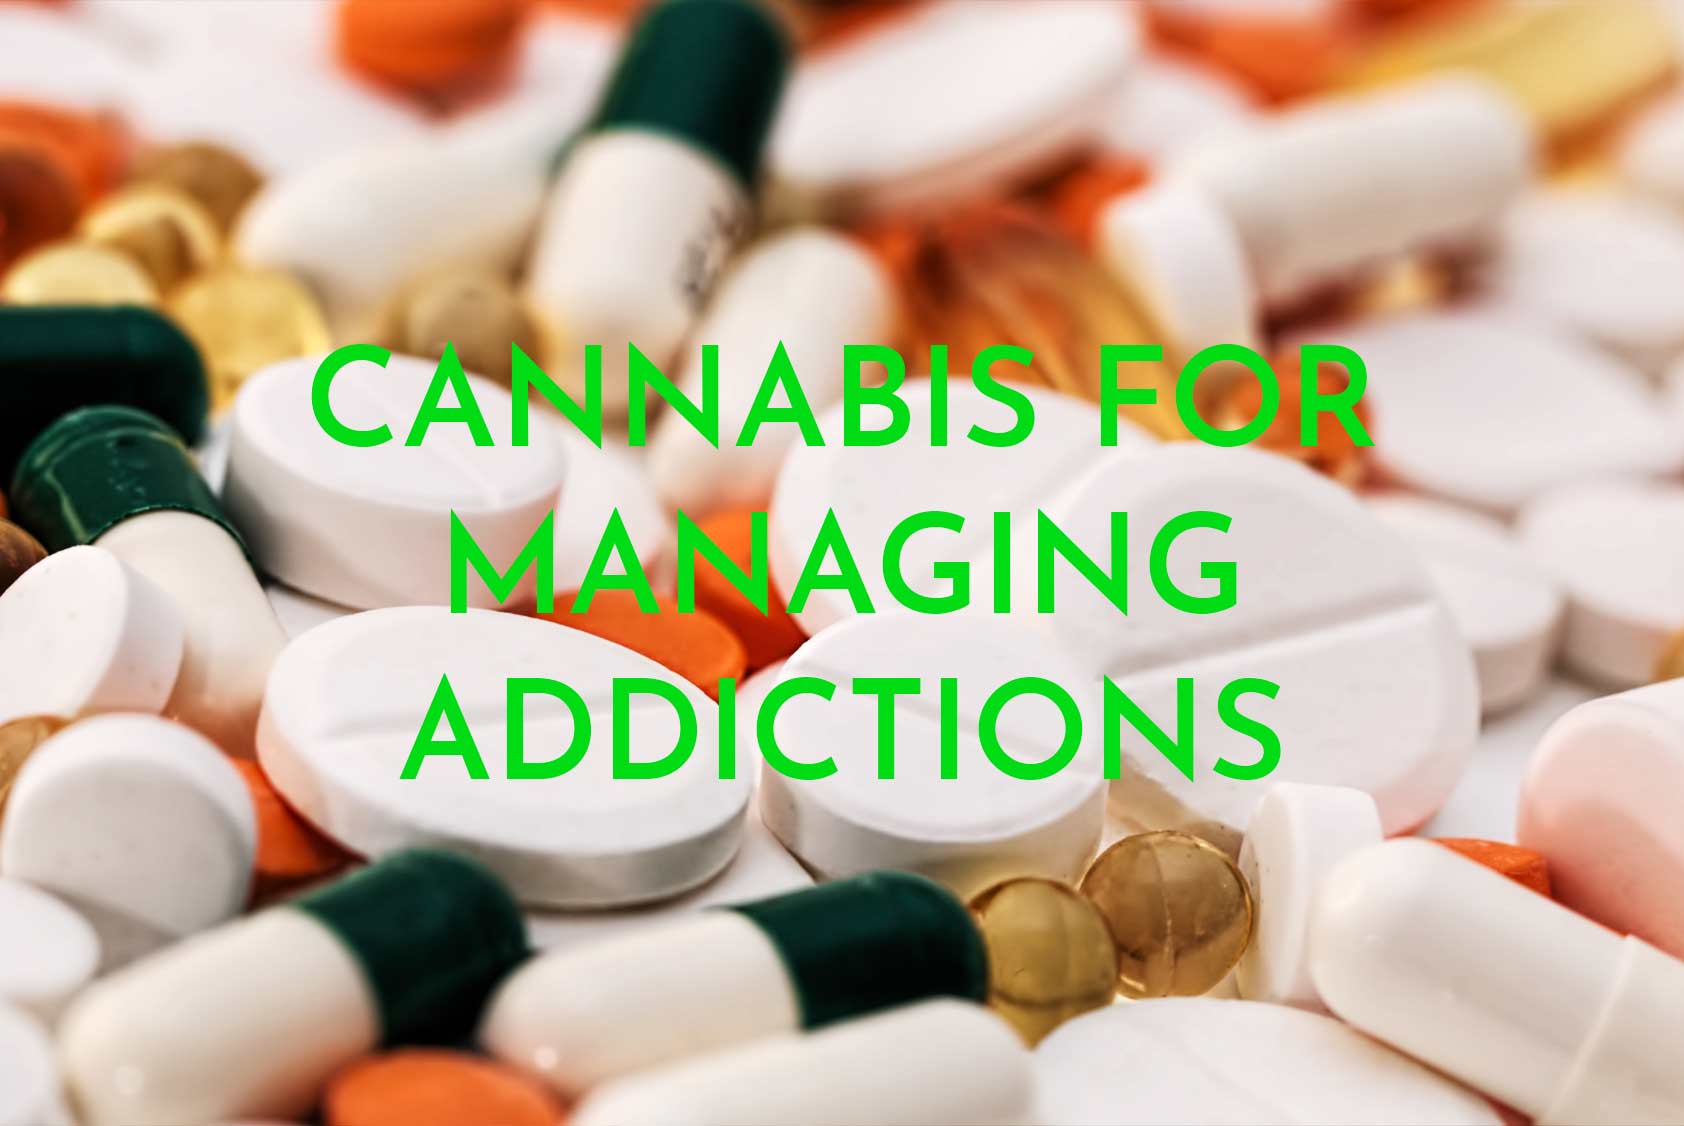 Cannabis for managing addictions